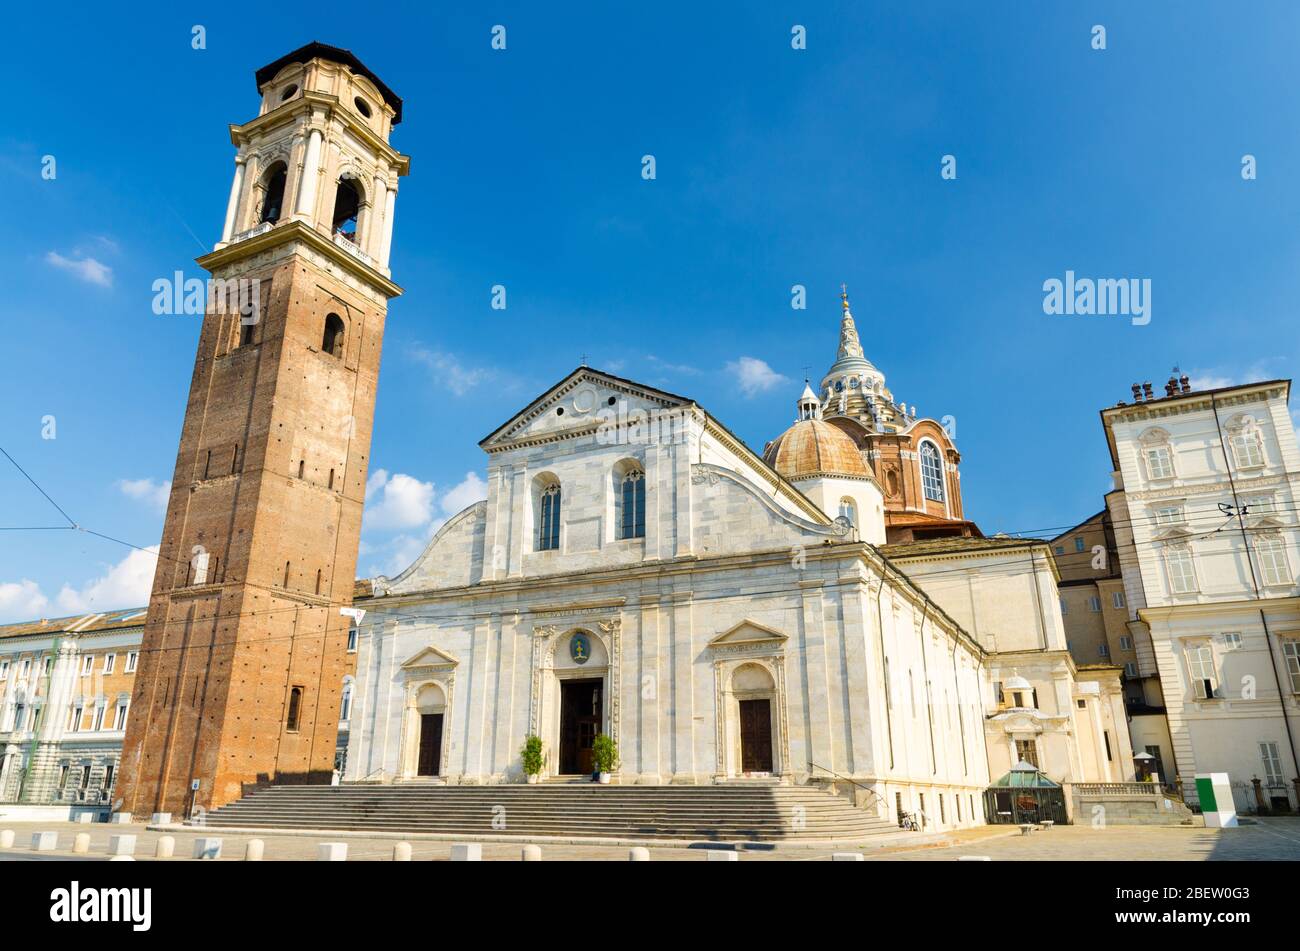 Duomo di Torino San Giovanni Battista catholic cathedral where the Holy Shroud of Turin is rested with bell tower and Sacra Sindone chapel on square i Stock Photo